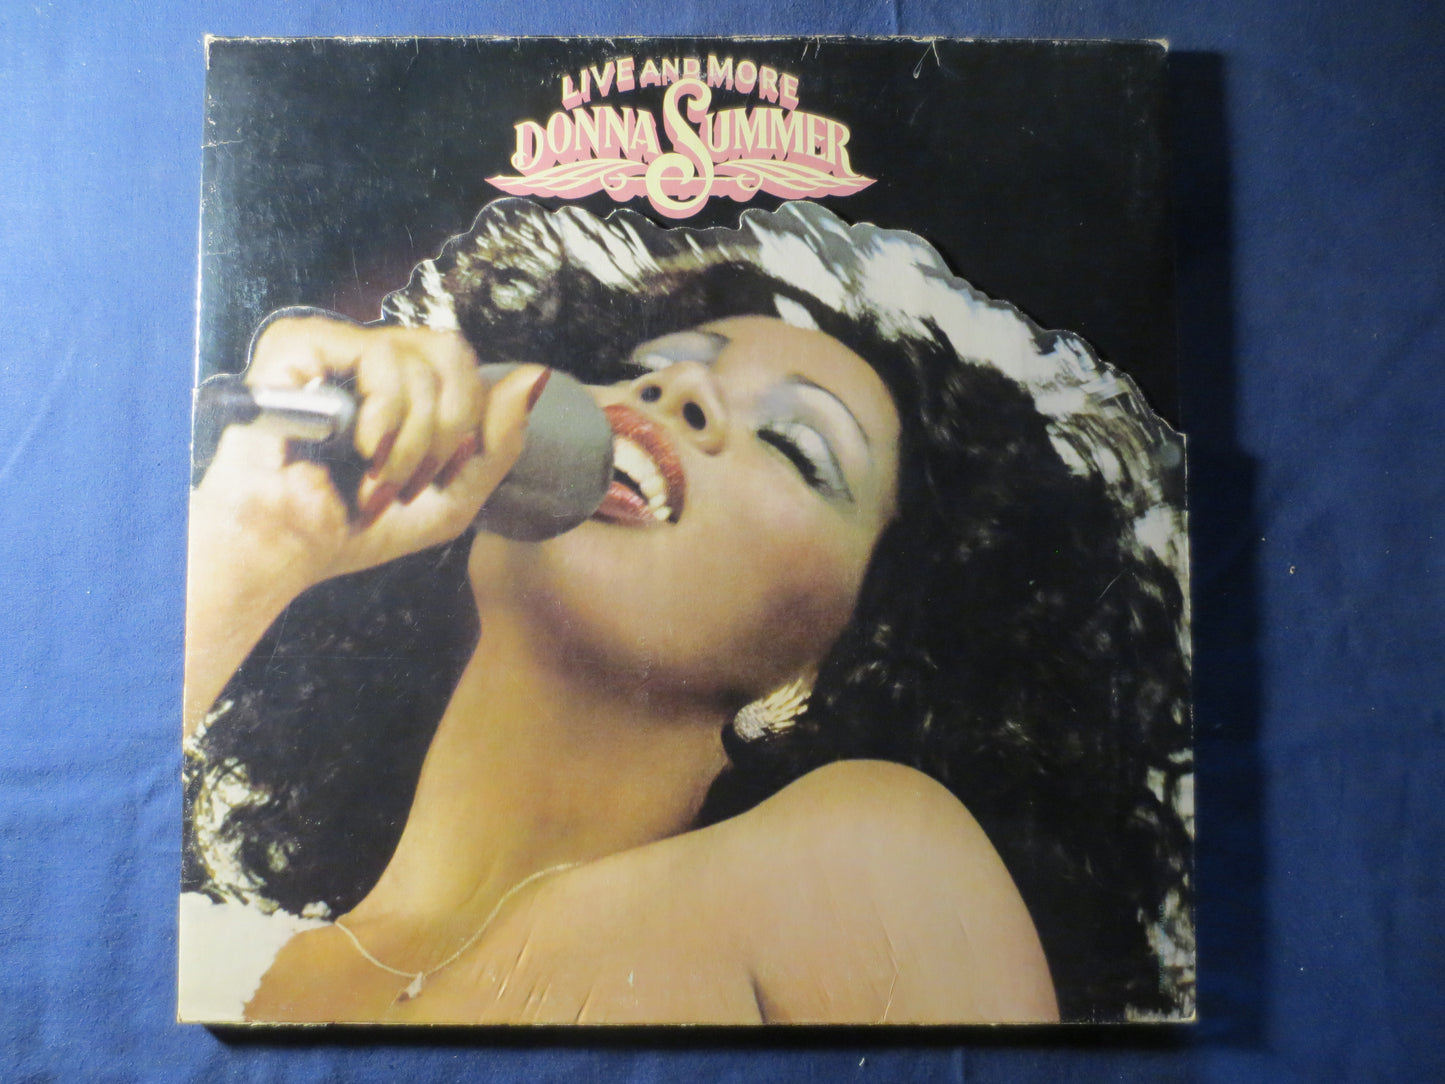 DONNA SUMMER, LIVE and More, Donna Summer Record, Donna Summer Album, Donna Summer Lp, Disco Records Pop Lp, 1977 Records